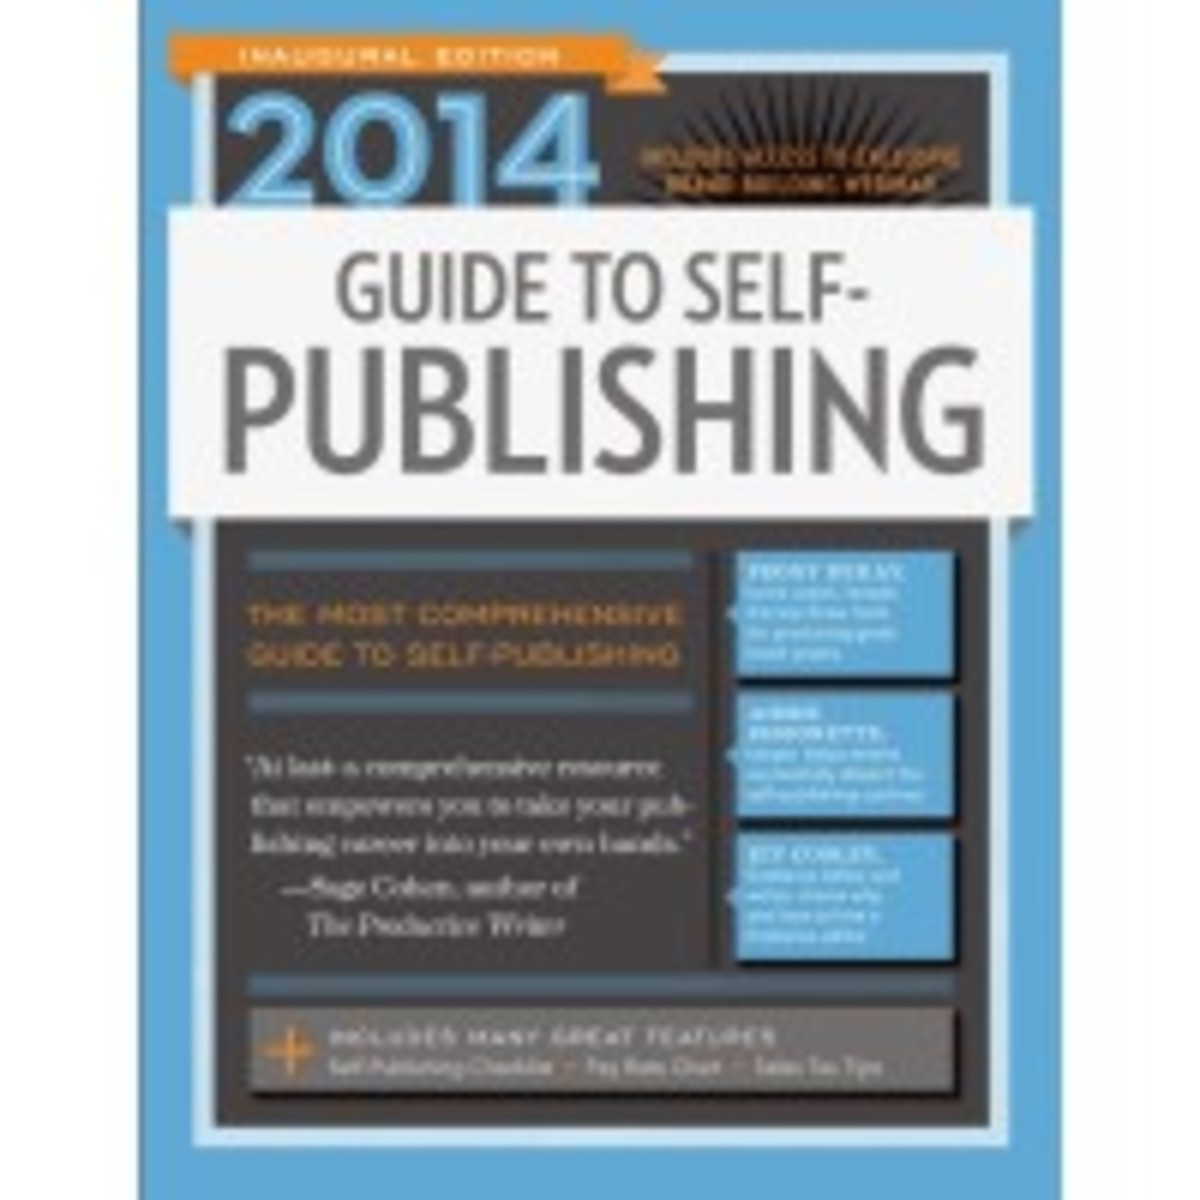 2014-guide-to-self-publishing